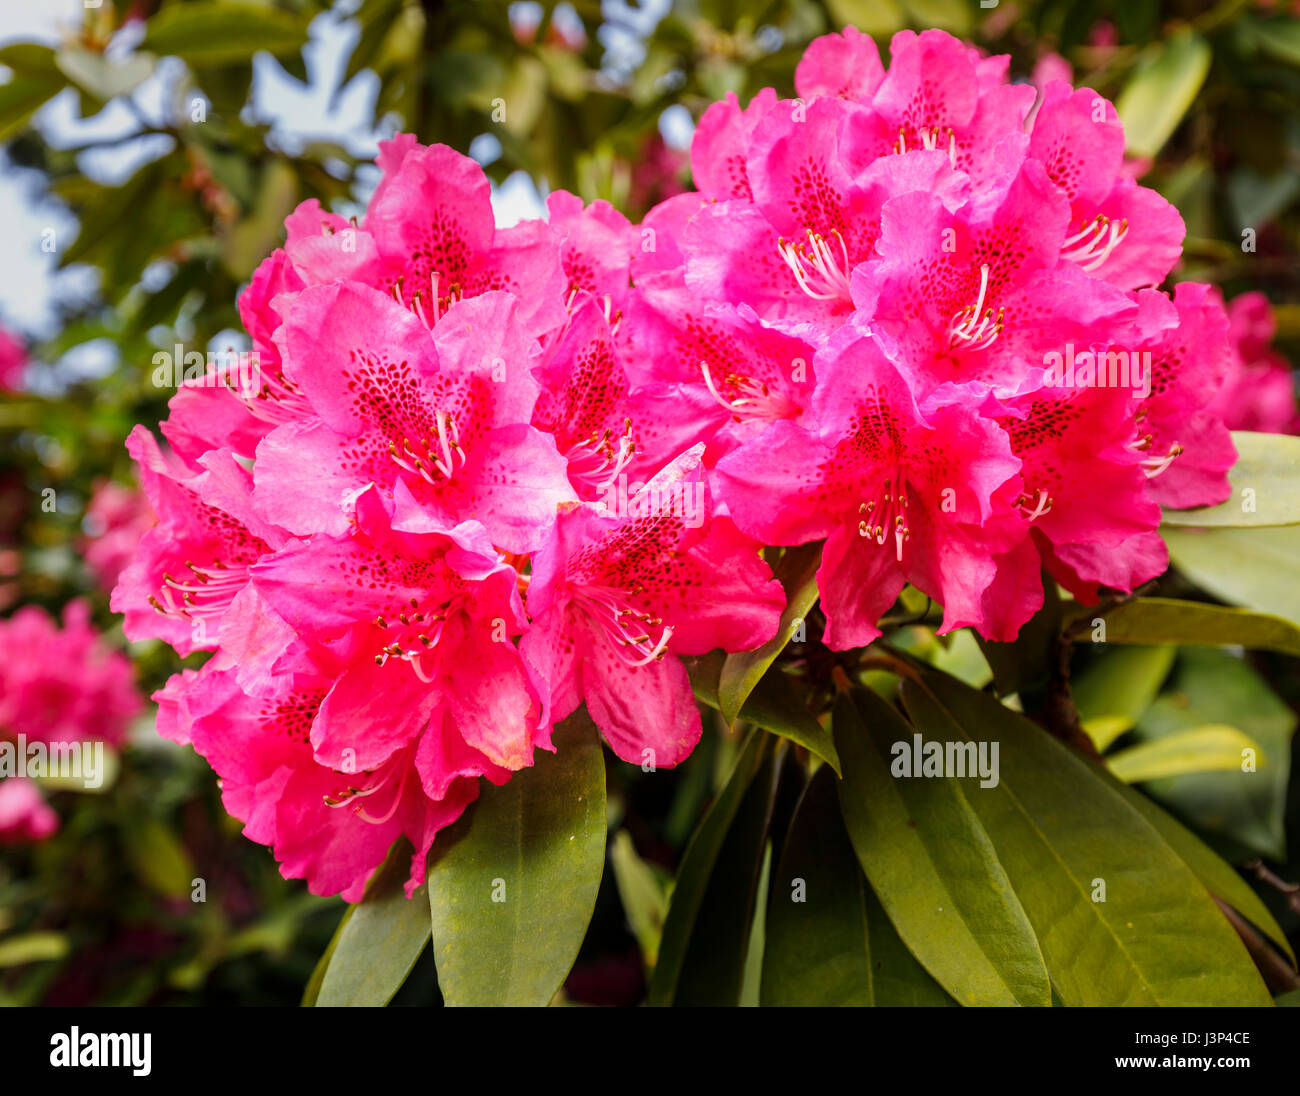 Large bright red rhododendron flowers close-up, blooming in May in West Sussex, south-east England Stock Photo